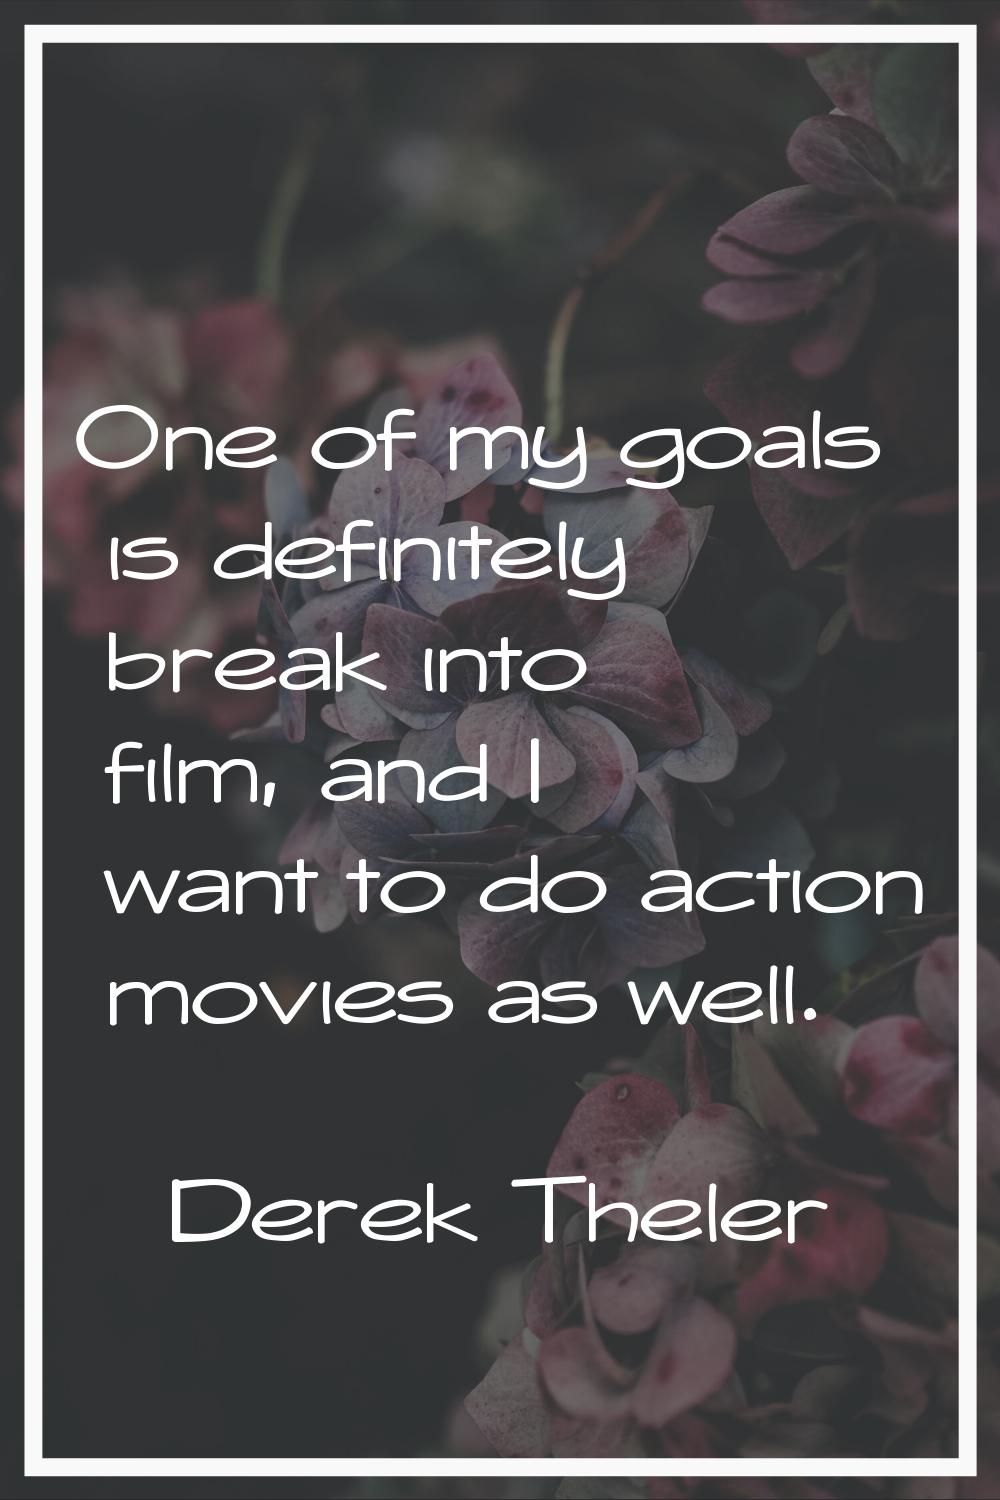 One of my goals is definitely break into film, and I want to do action movies as well.